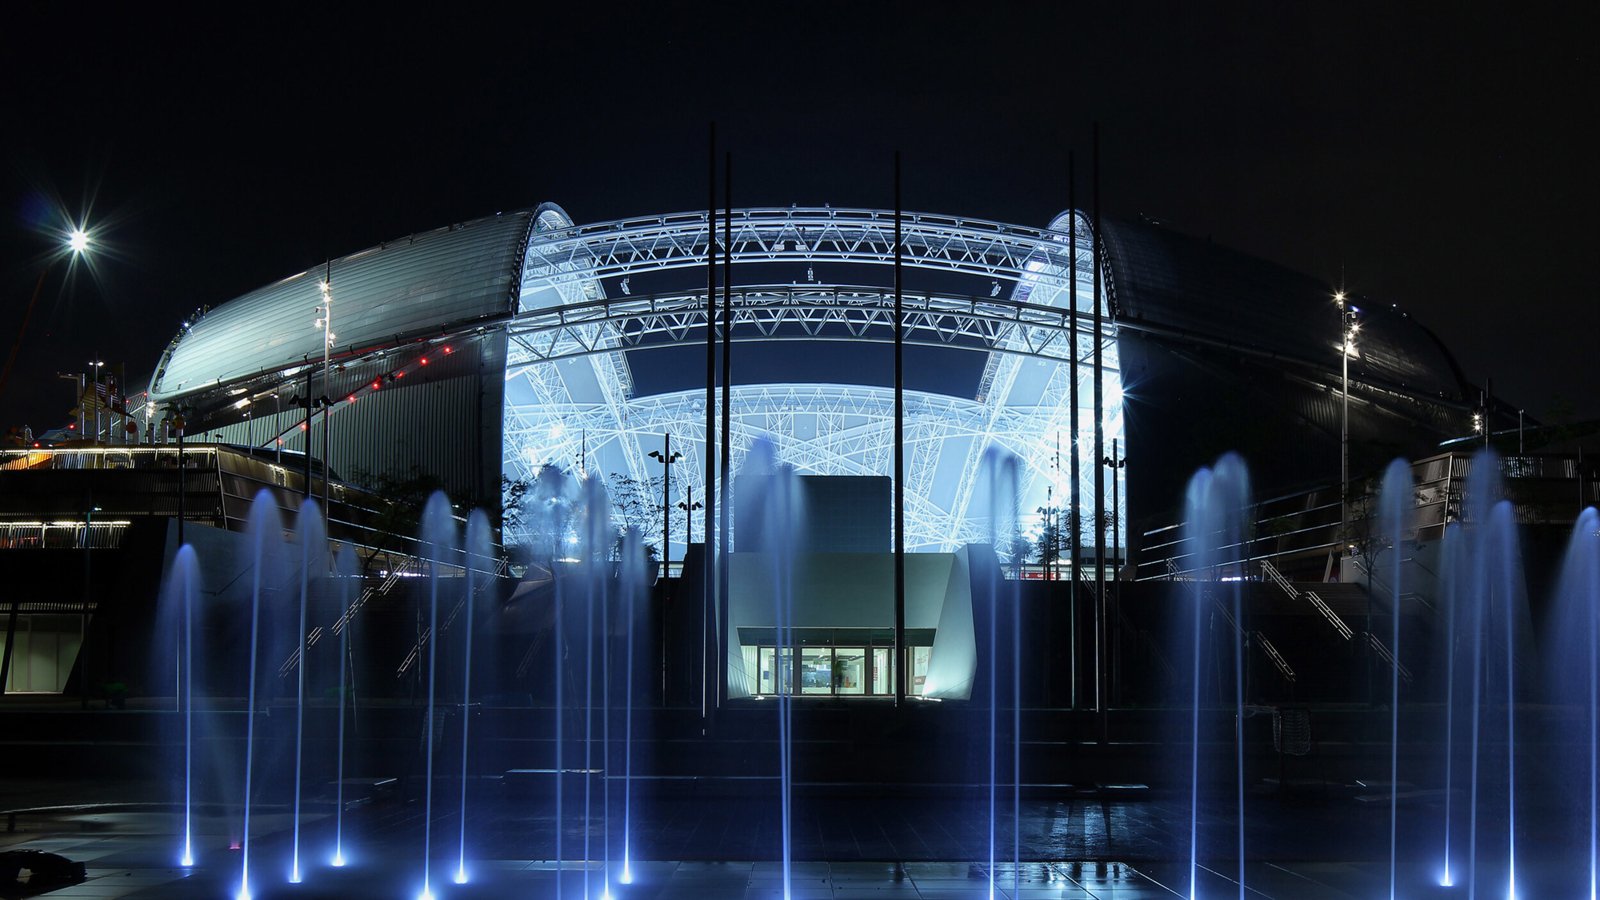 Singapore Sports Hub at night with fountains in the foreground